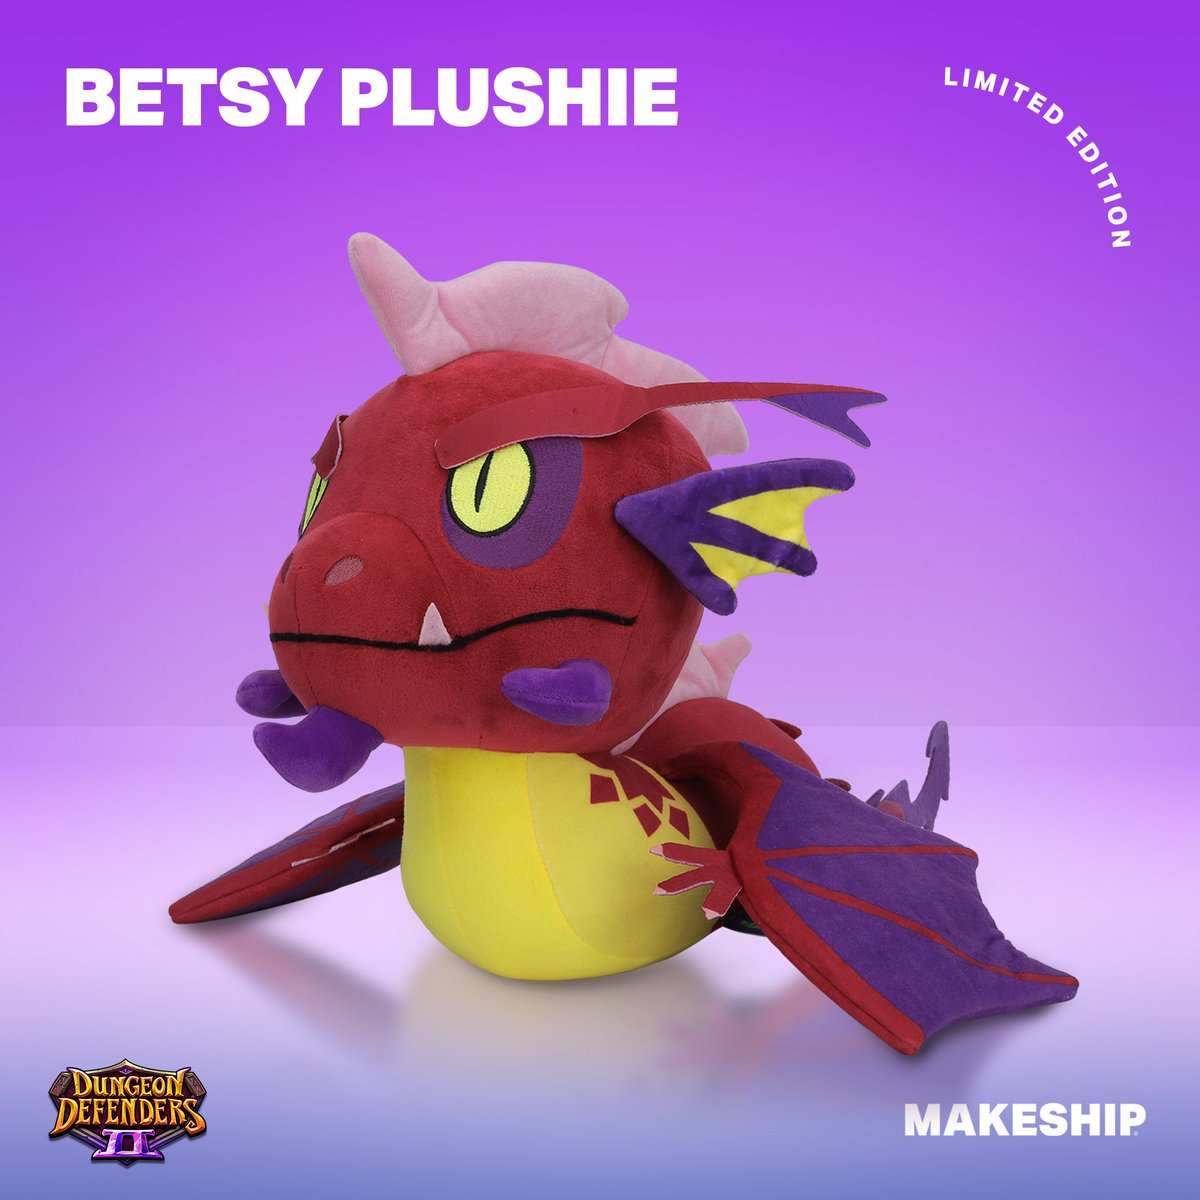 The jumbo Betsy plush has been FULLY FUNDED! 🎉🎉

A MONSTROUS thank you to all those who supported and/or helped to spread the word. ❤️

If you're still interested in befriending a Betsy of your own, today is your LAST CHANCE TO DO SO!

▶️ ow.ly/M8z750RYFJC